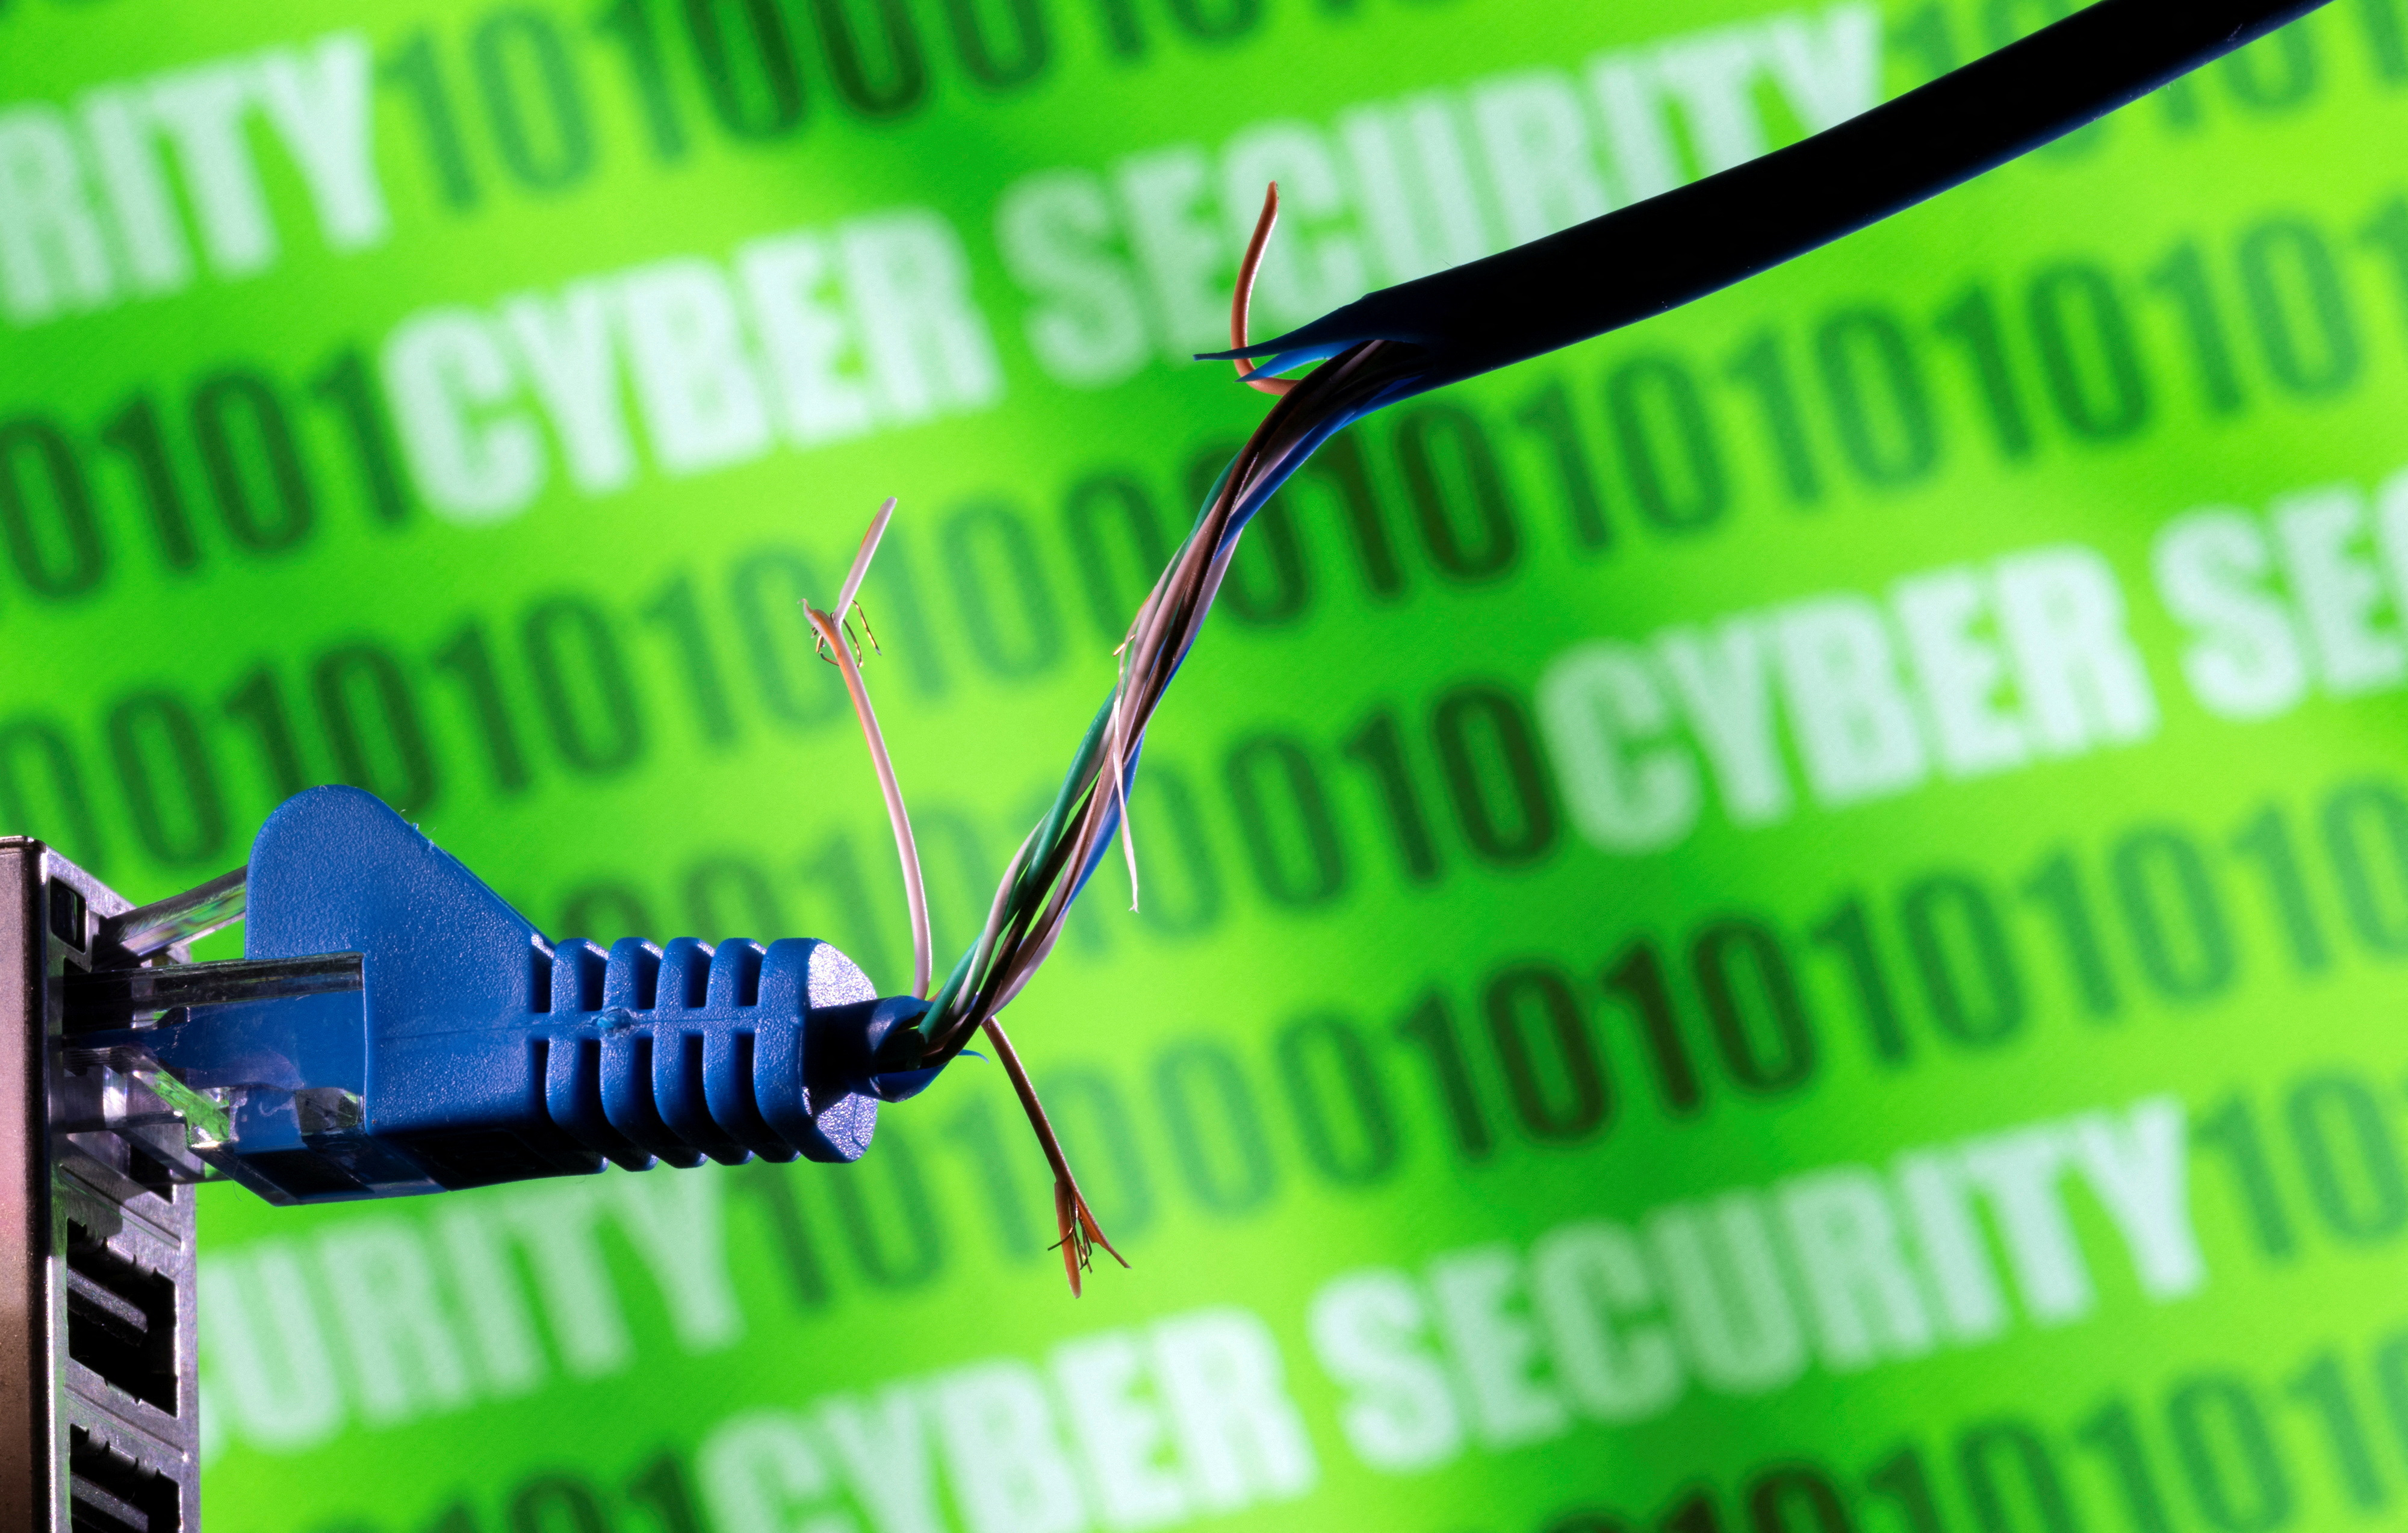 Illustration shows broken Ethernet cable, binary code and words "cyber security